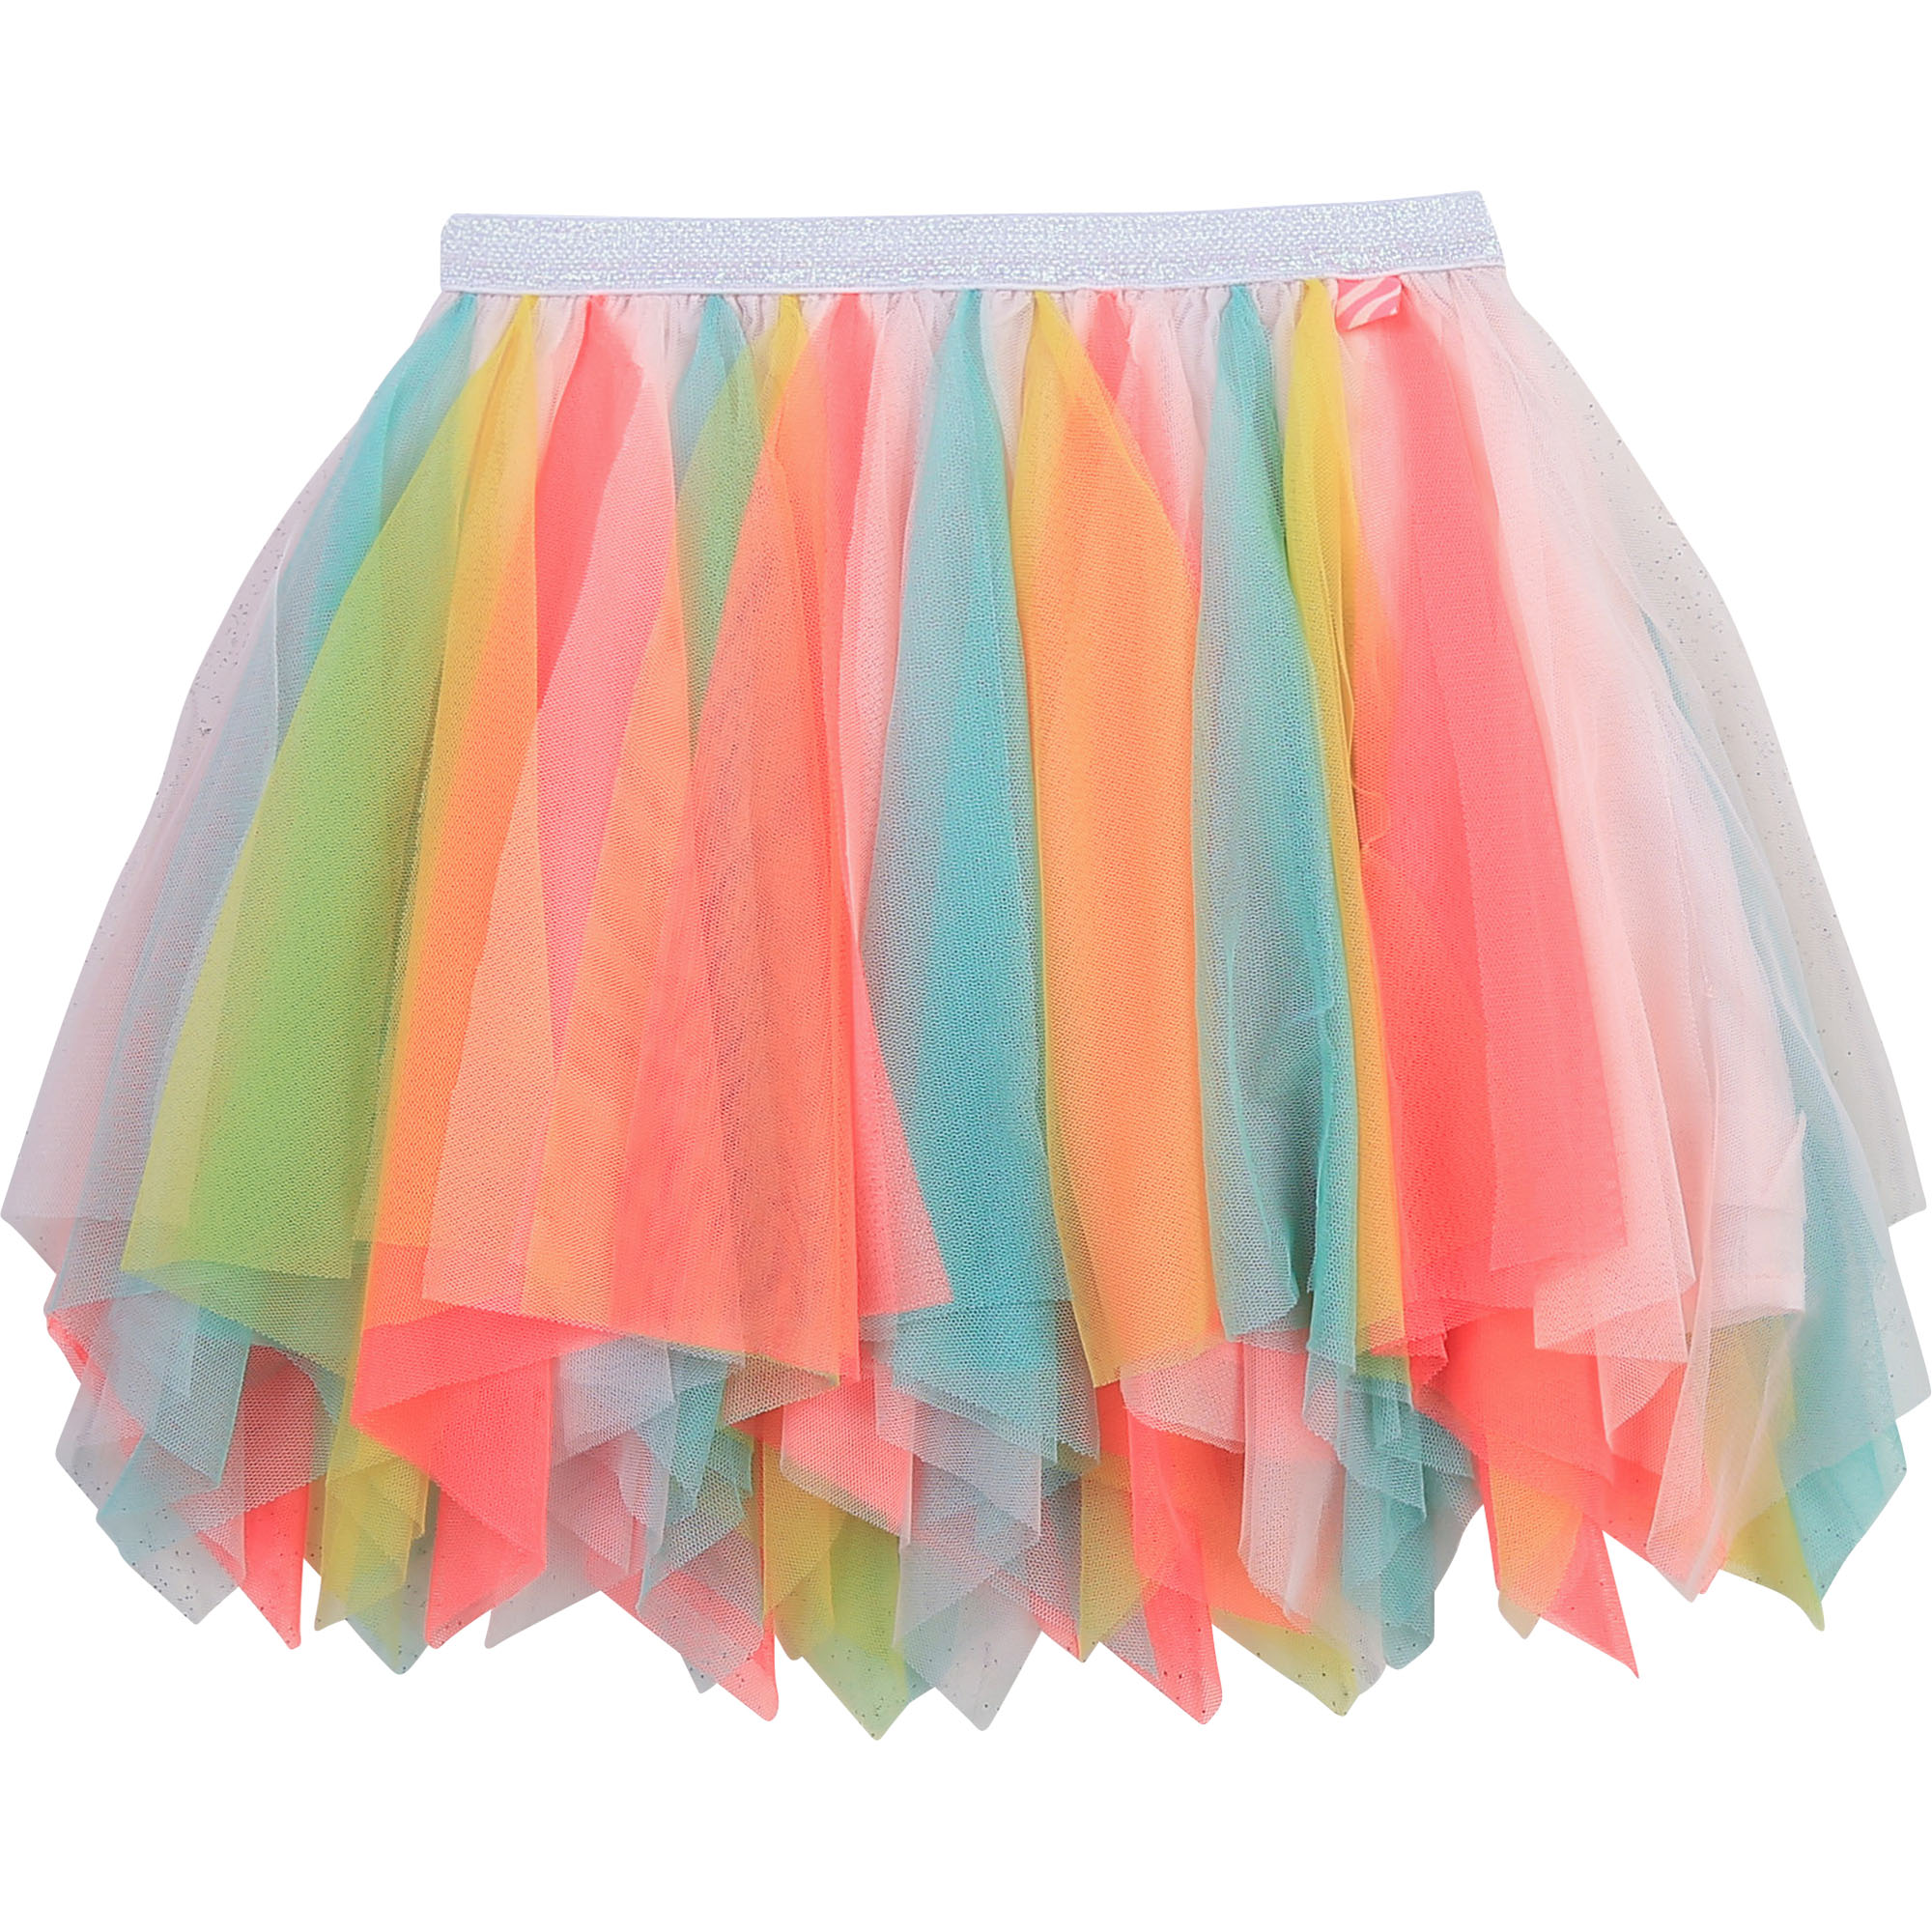 Tulle skirt with cotton lining BILLIEBLUSH for GIRL